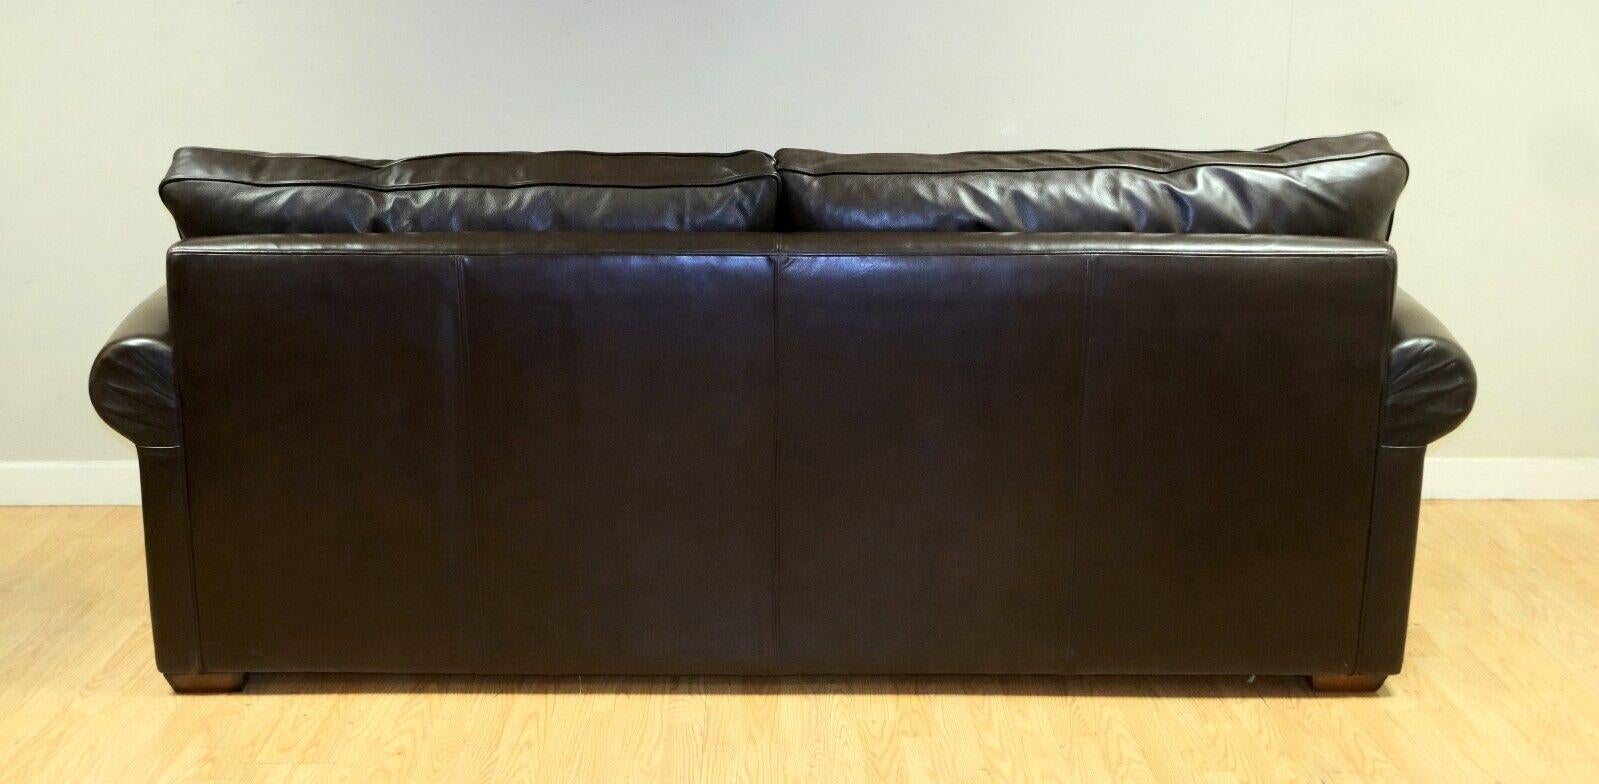 STUNNiNG DURESTA GARRICK THREE SEATER BROWN LEATHER SOFA ON CLASSIC SCROLL ARMS For Sale 1